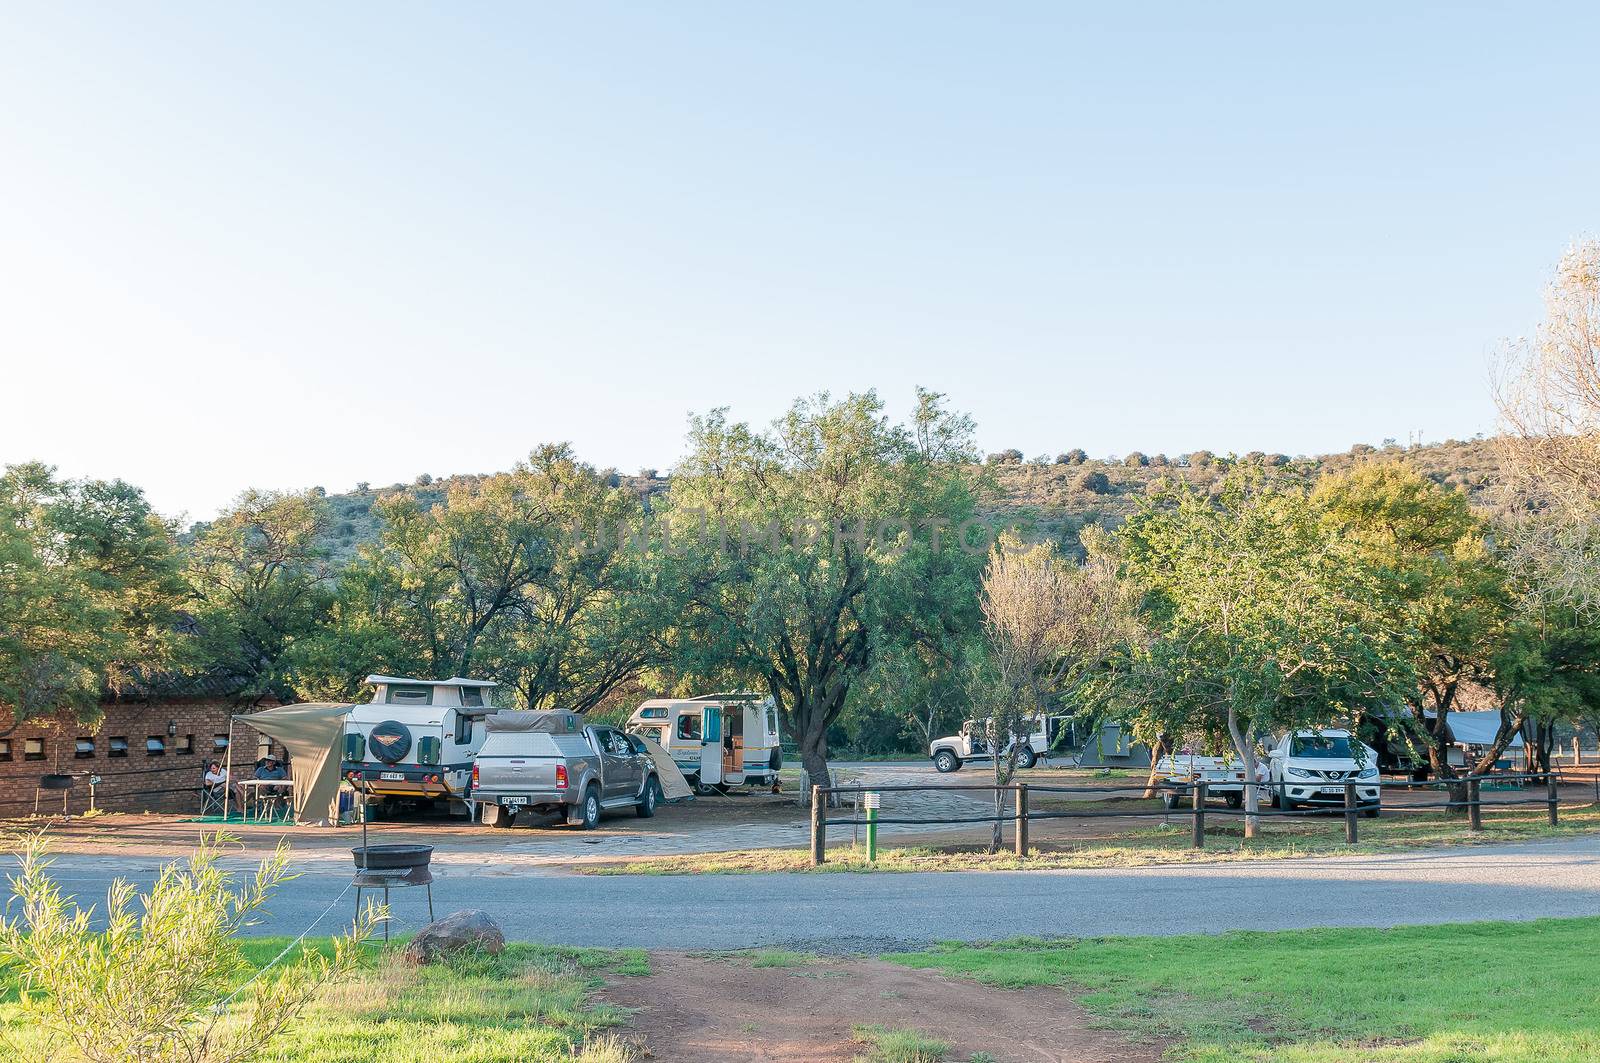 MOUNTAIN ZEBRA NATIONAL PARK, SOUTH AFRICA - FEBRUARY 18, 2016: Tents, a caravan, motorhome and vehicles at the camping grounds in the Mountain Zebra National Park near Cradock at sunset